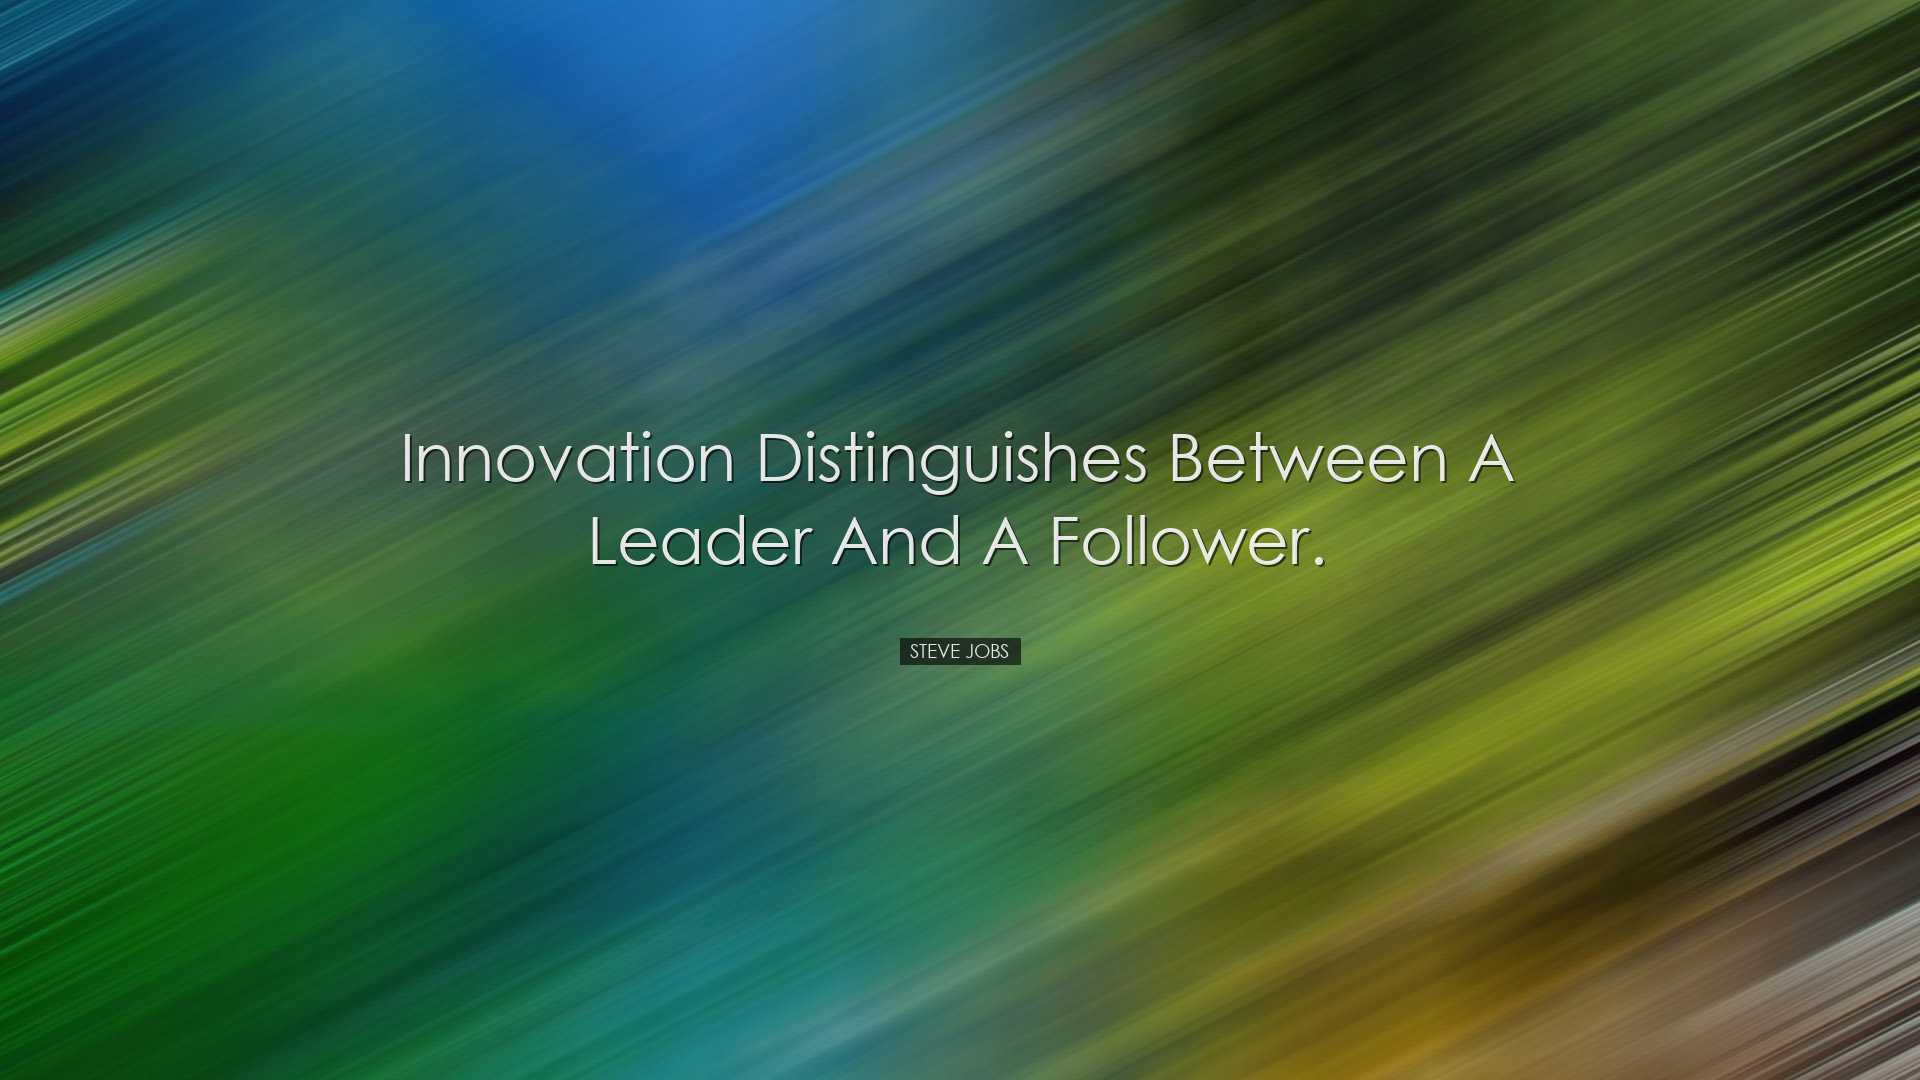 Innovation distinguishes between a leader and a follower. - Steve